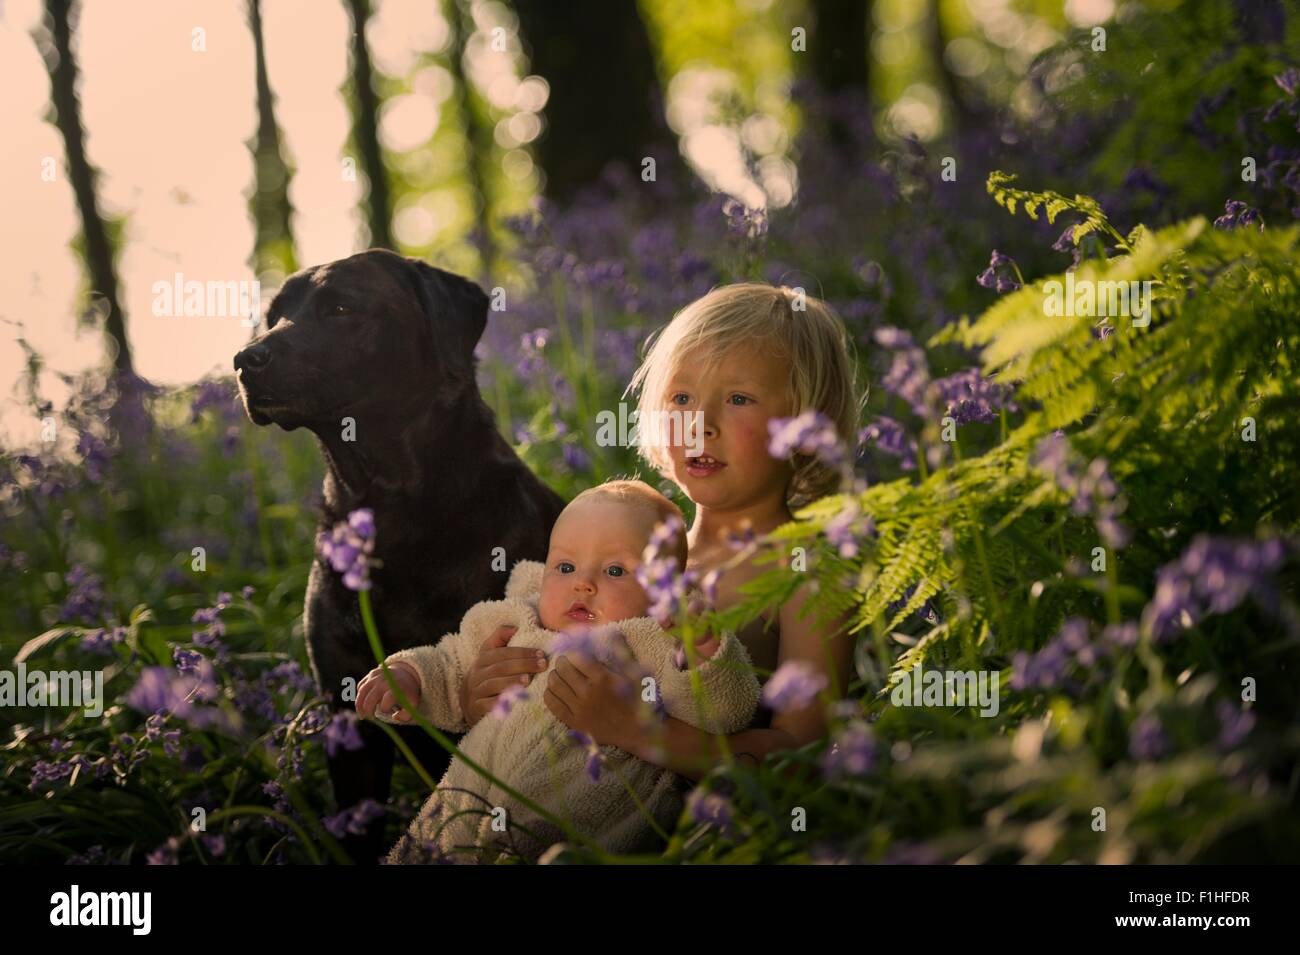 Young boy sitting with baby sister and dog in bluebell forest Stock Photo